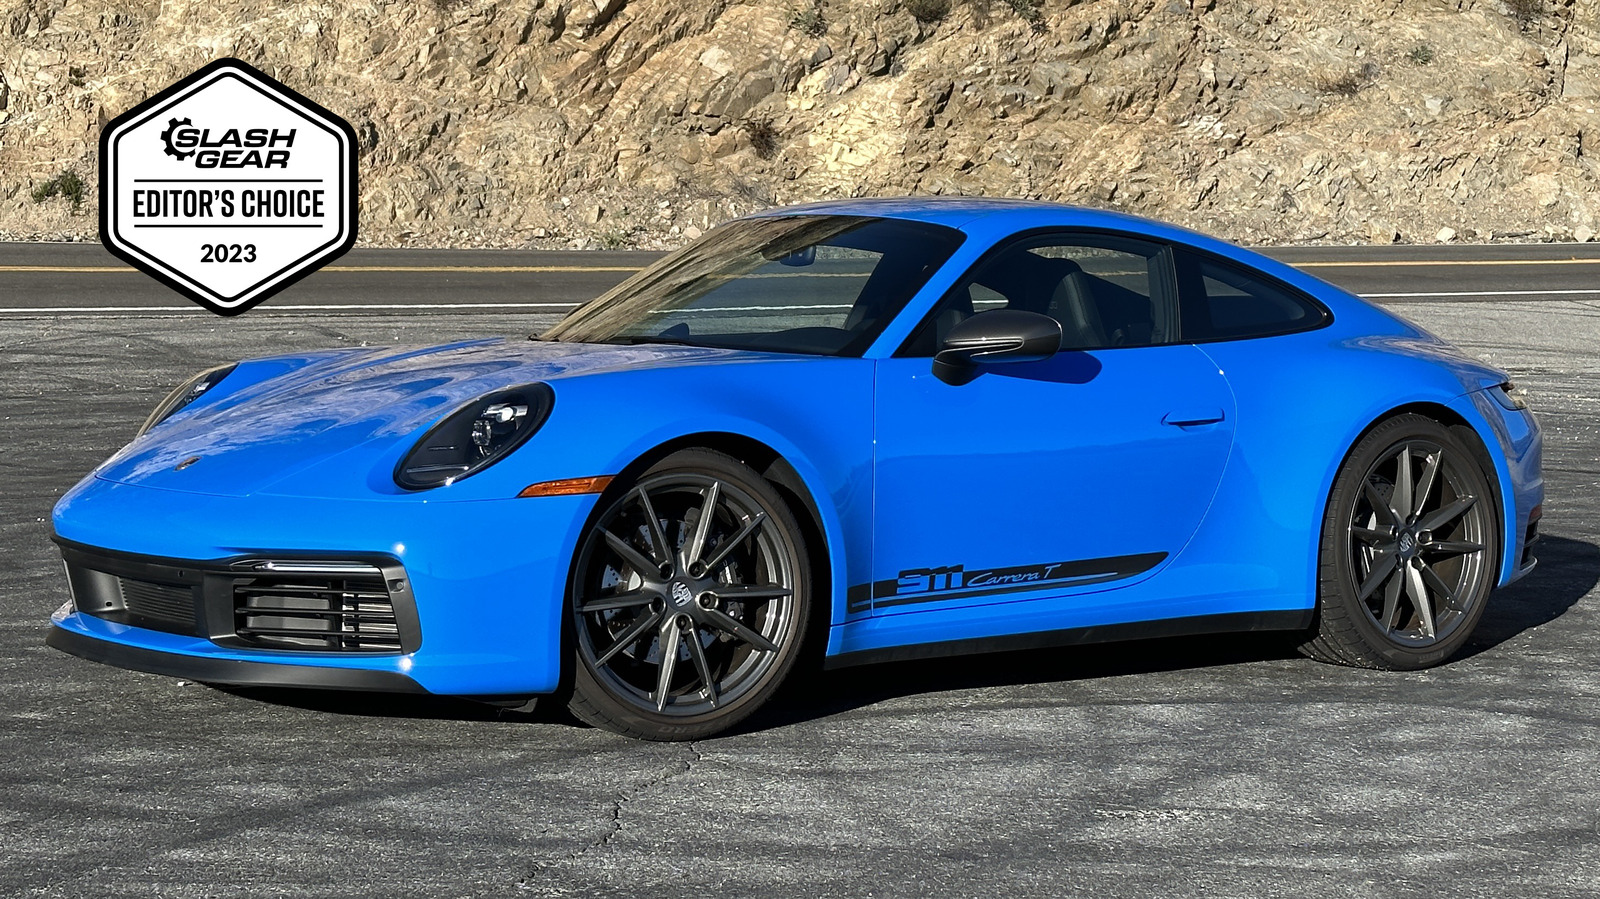 Review: 2023 Porsche 911 Carrera T is a seriously compelling